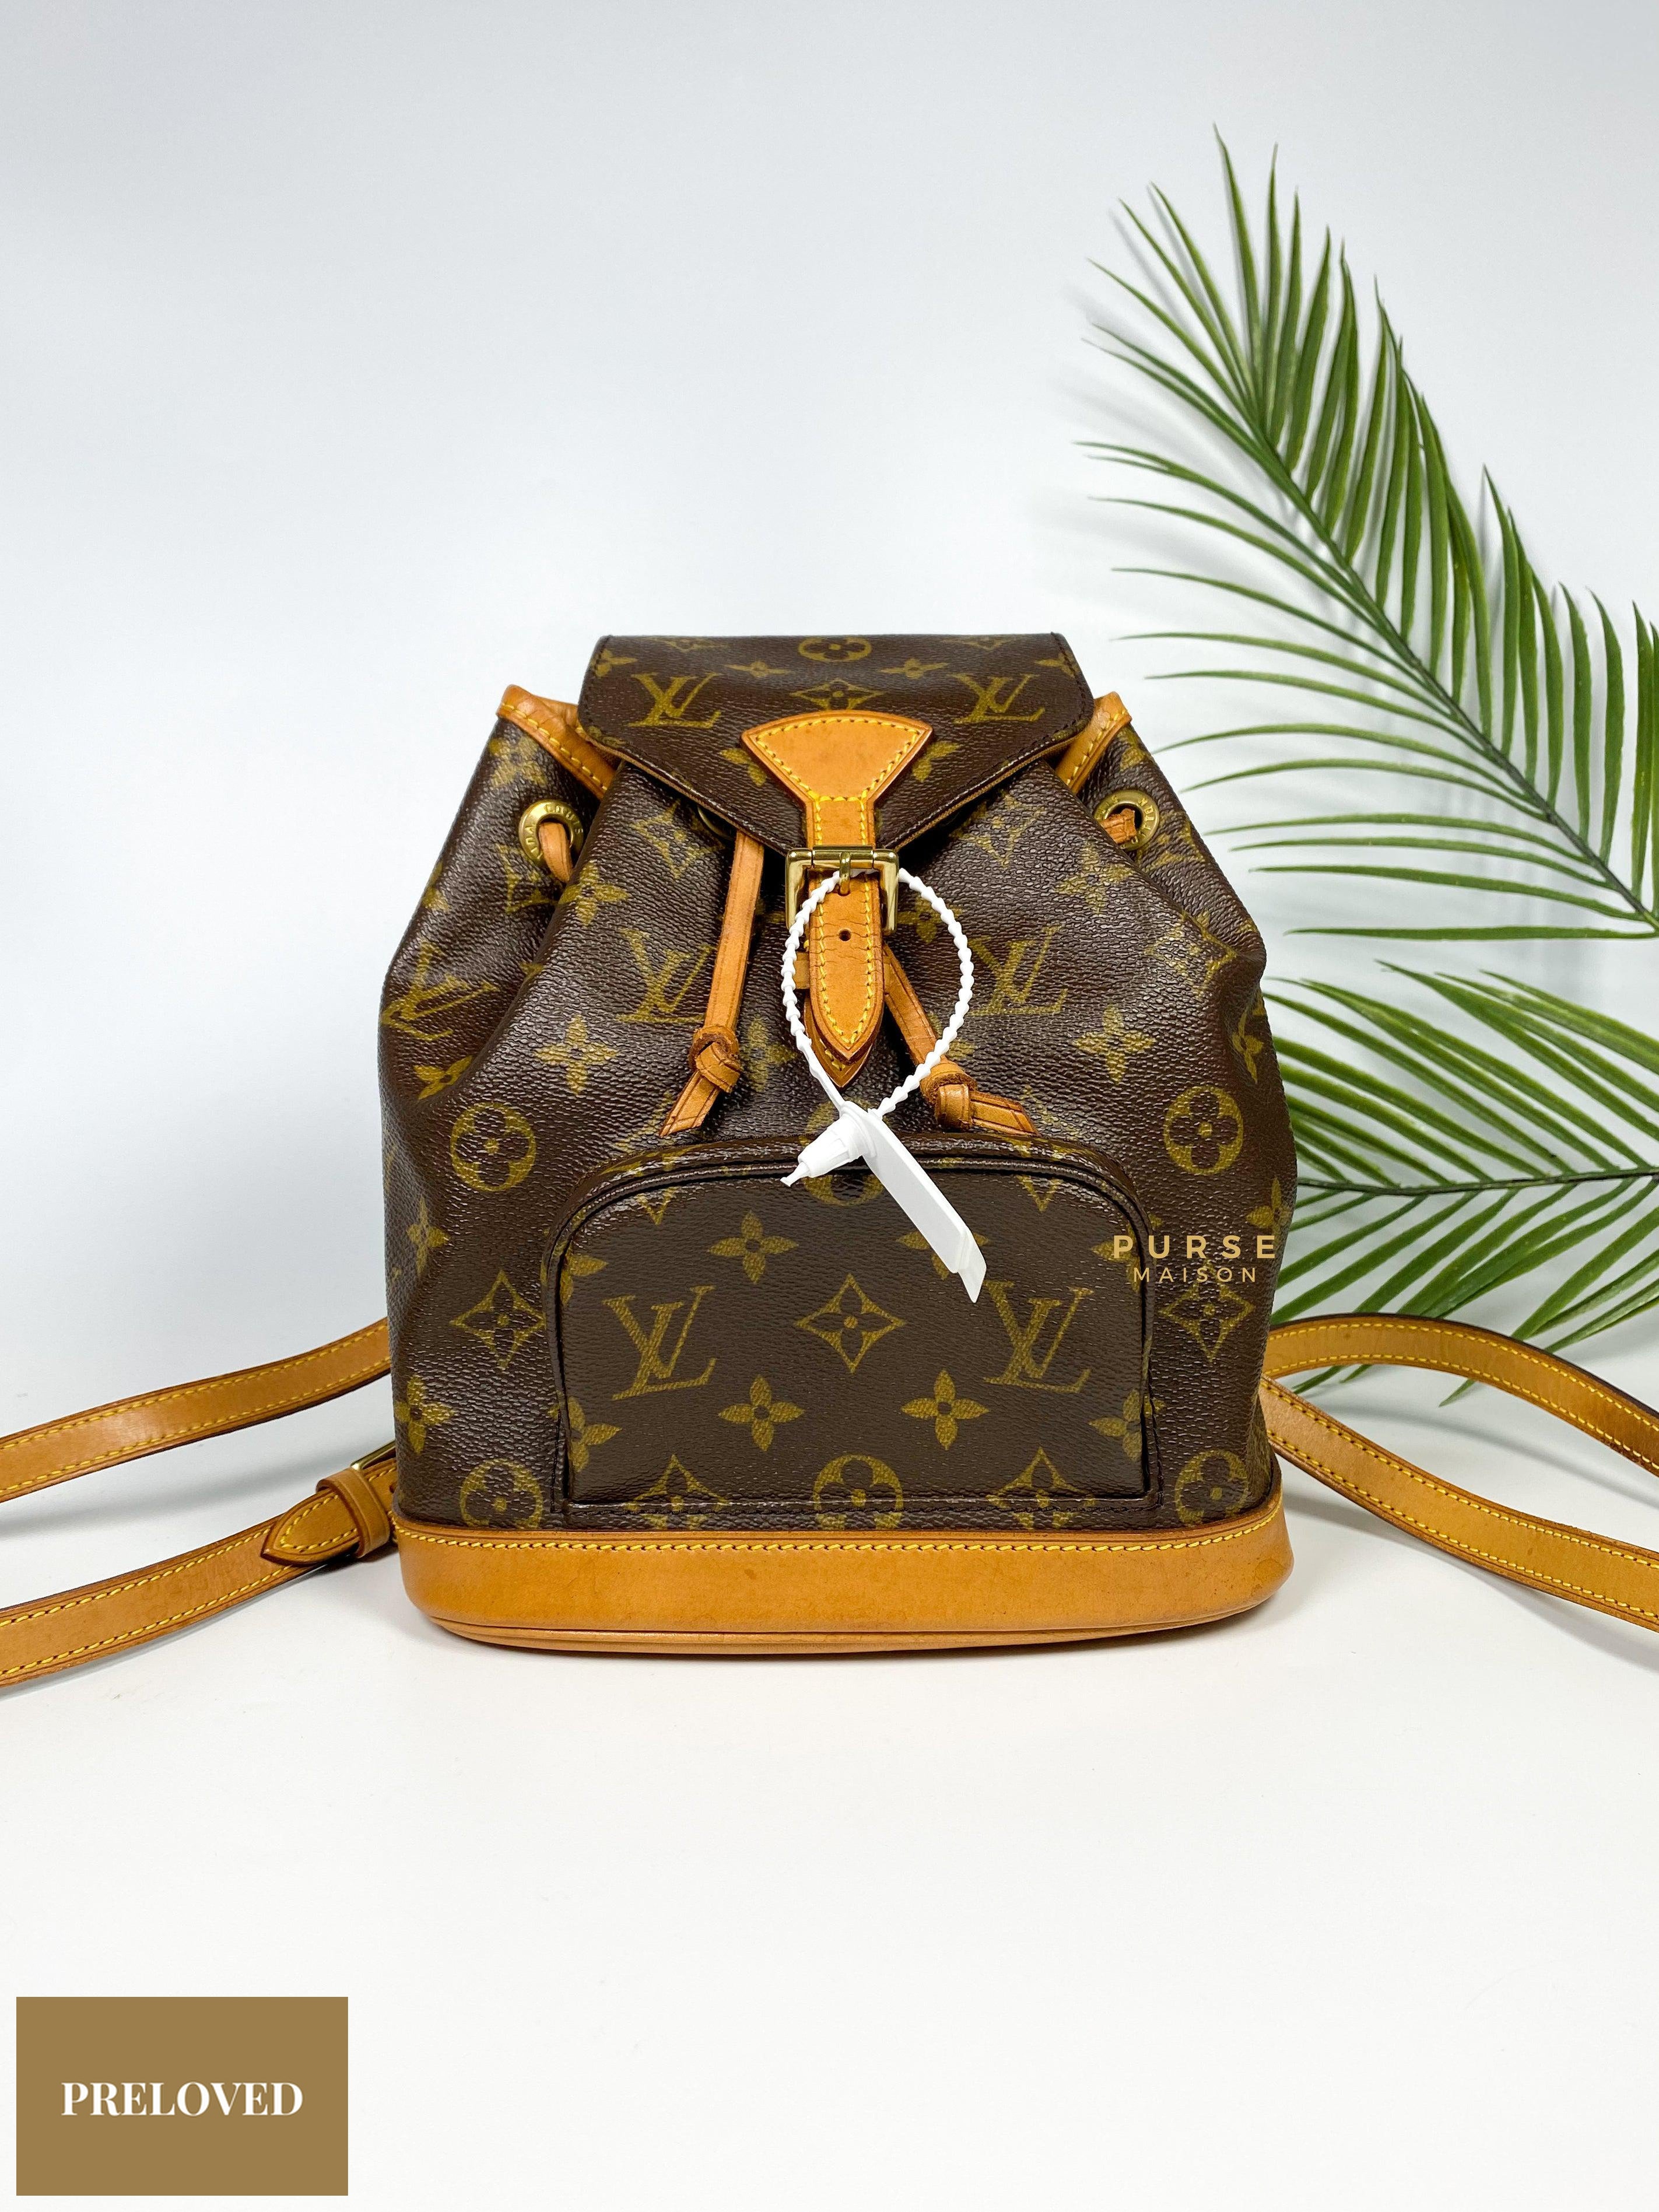 Discover the Best Louis Vuitton Backpack Styles  Handbags and Accessories   Sothebys